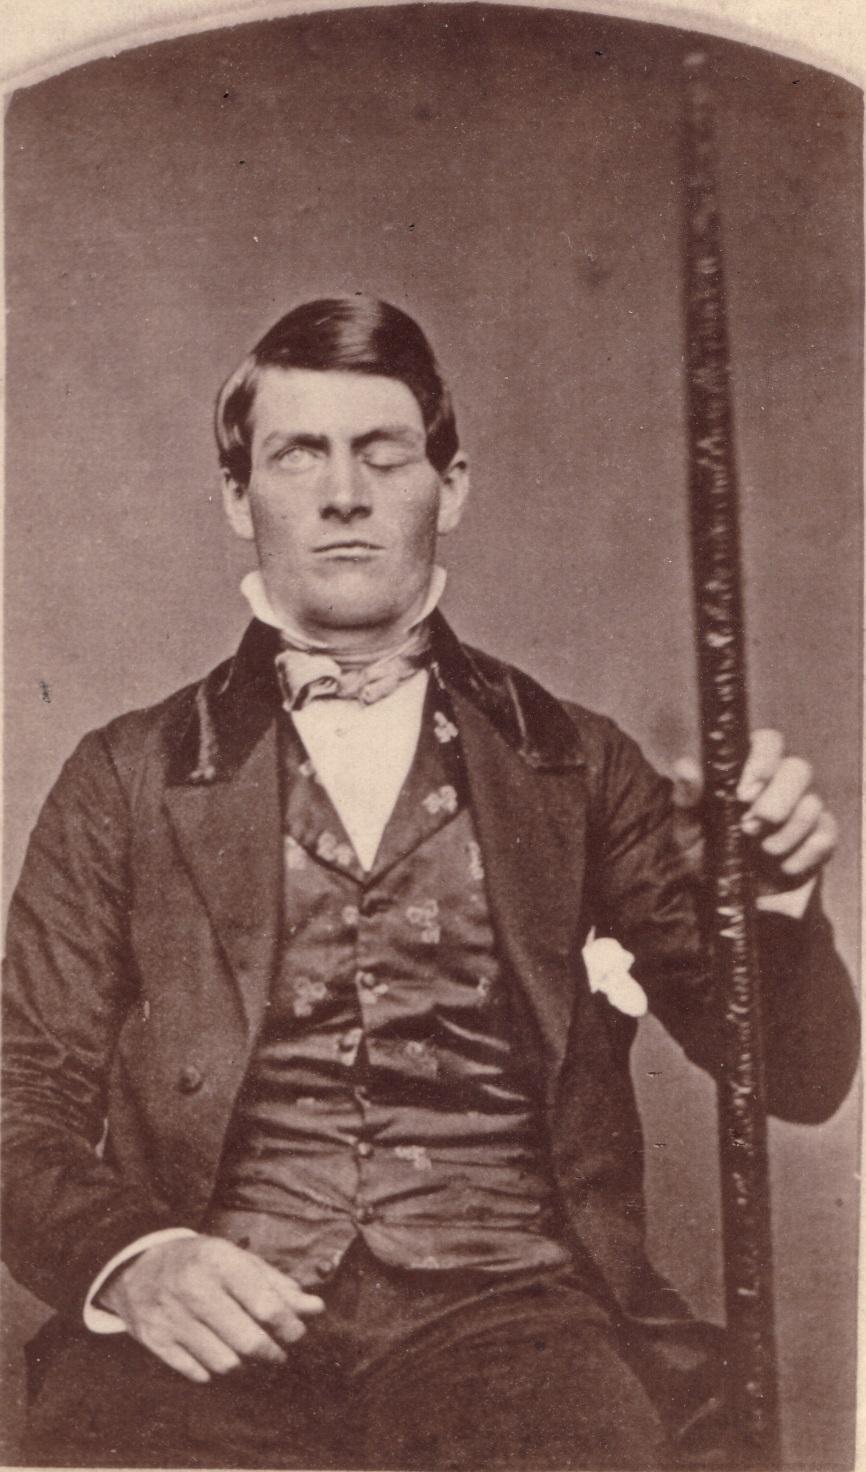 Self-control: the case of Phineas Gage Foreman on railroad crew in 1848, supervising blasting with black powder 1.